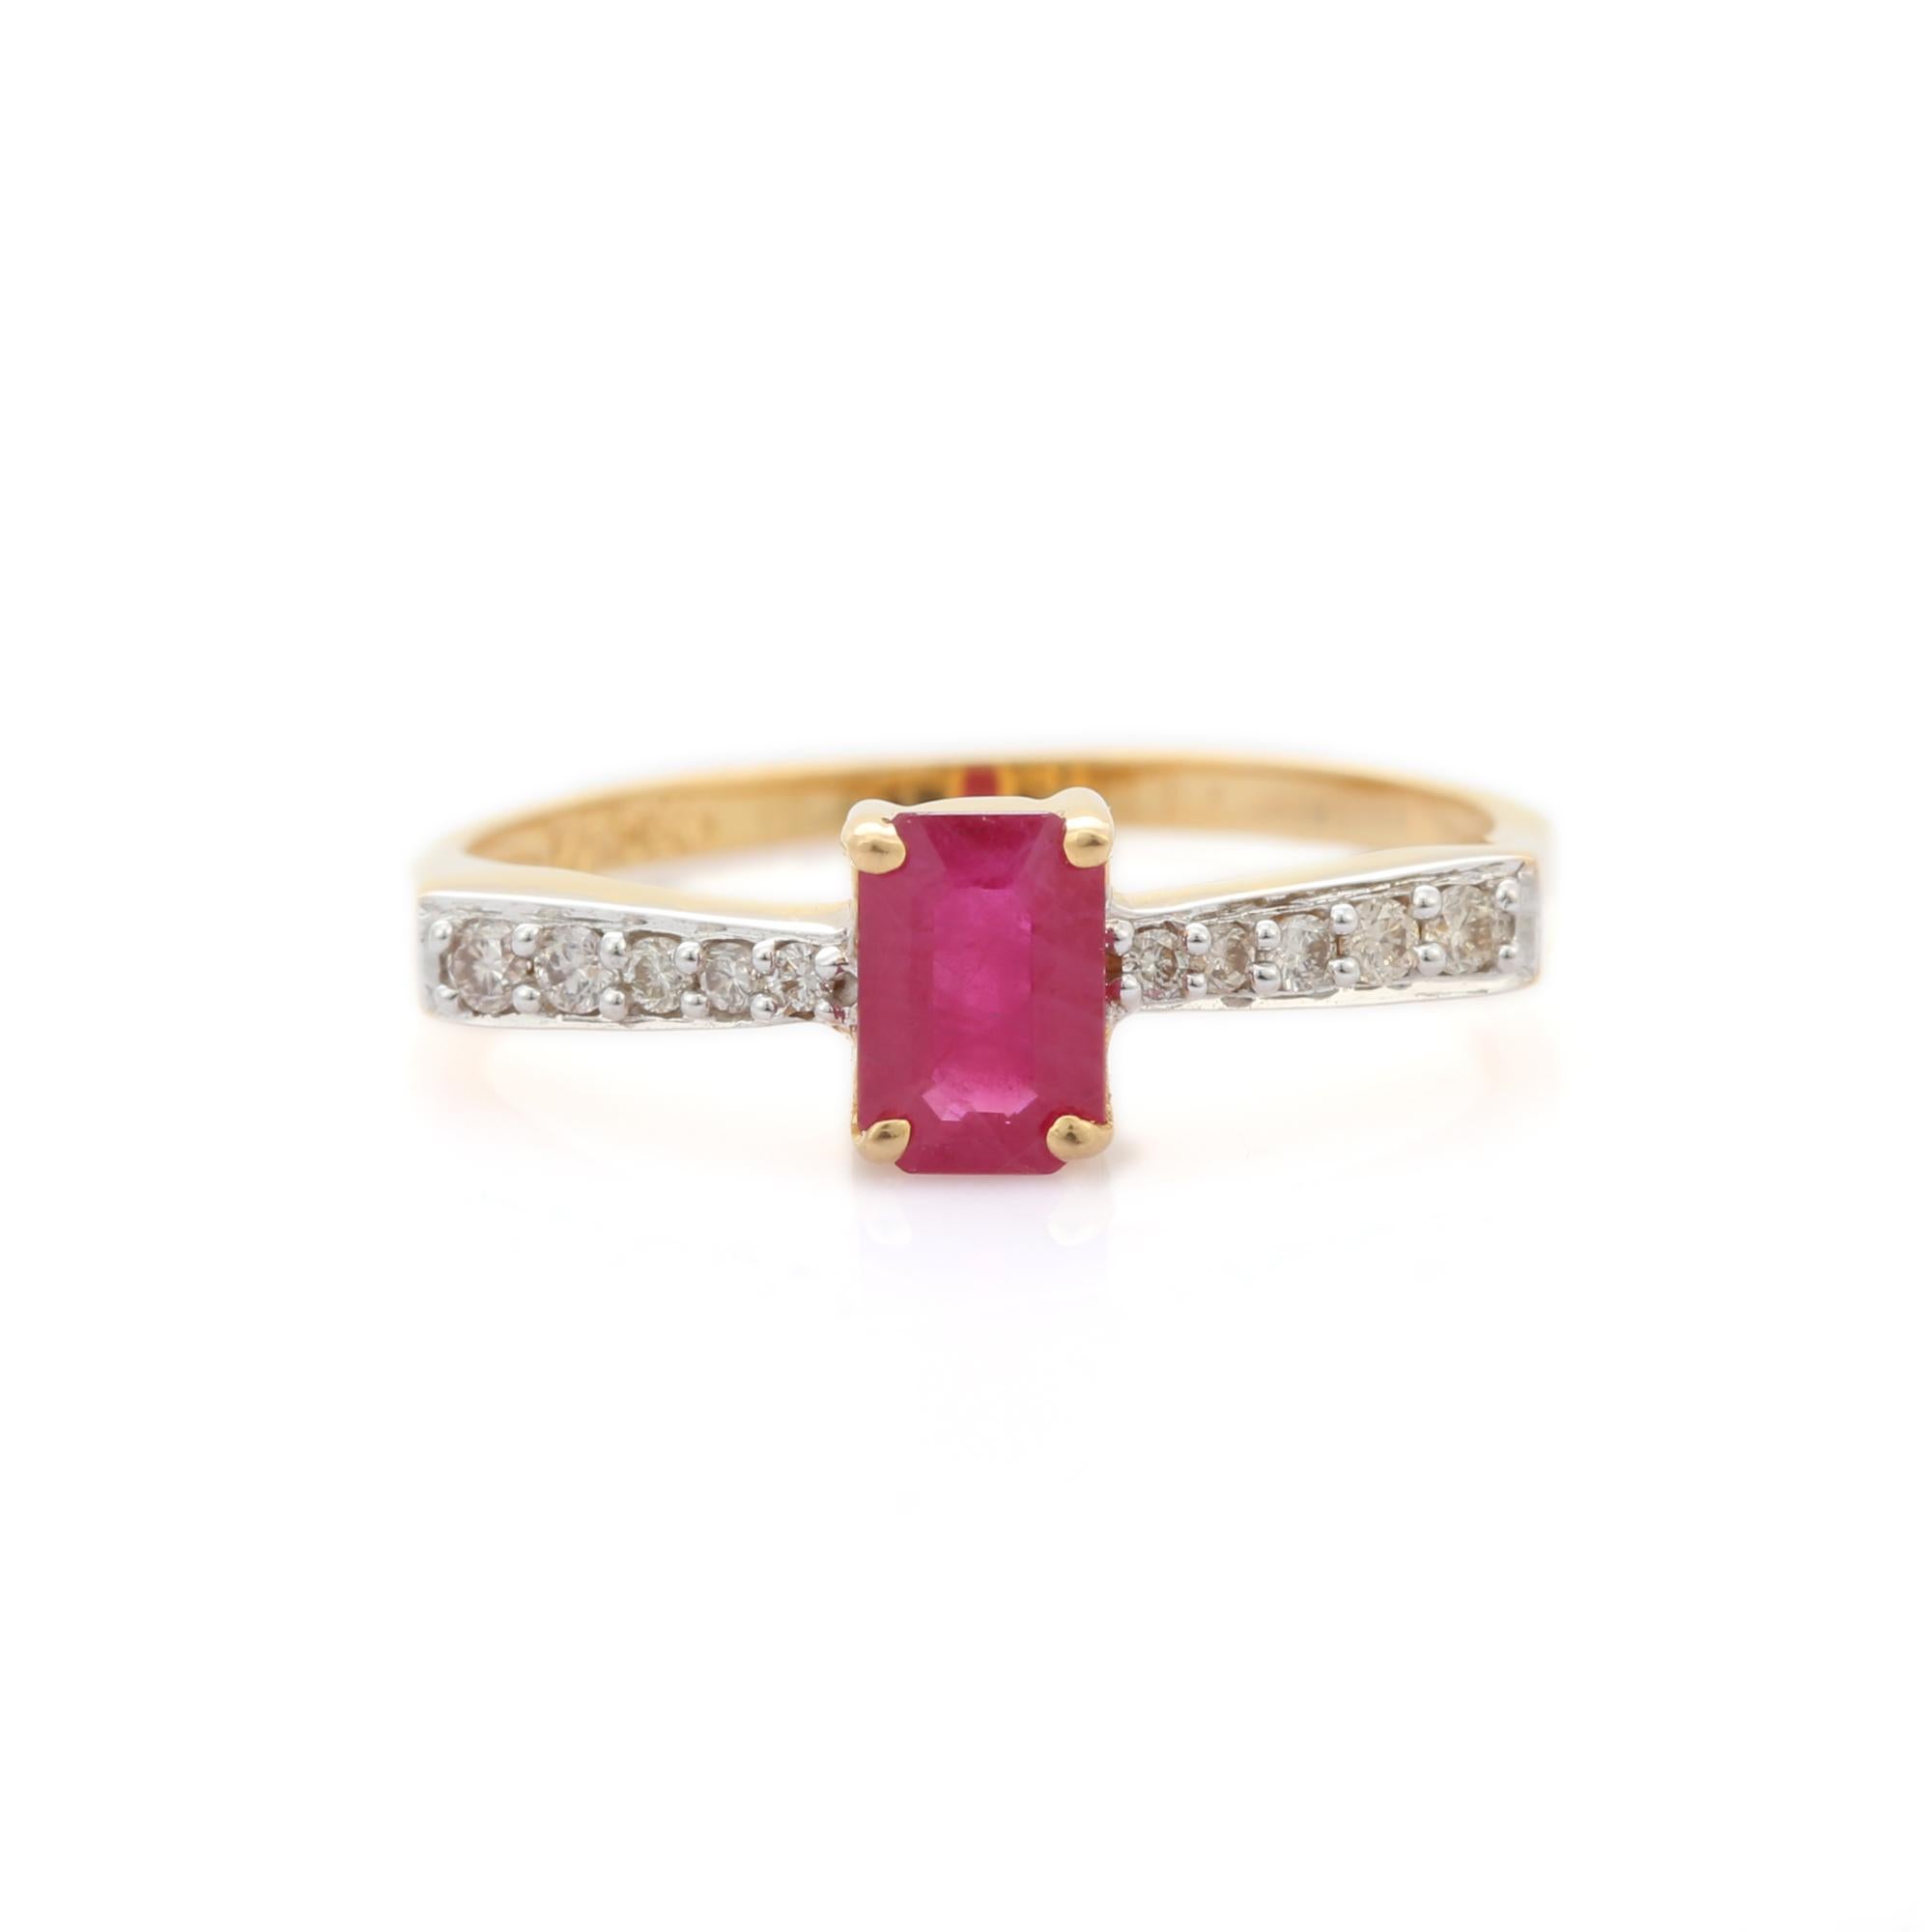 For Sale:  Dainty Stackable Octagon Cut Diamond and Ruby 18K Yellow Gold Ring 5